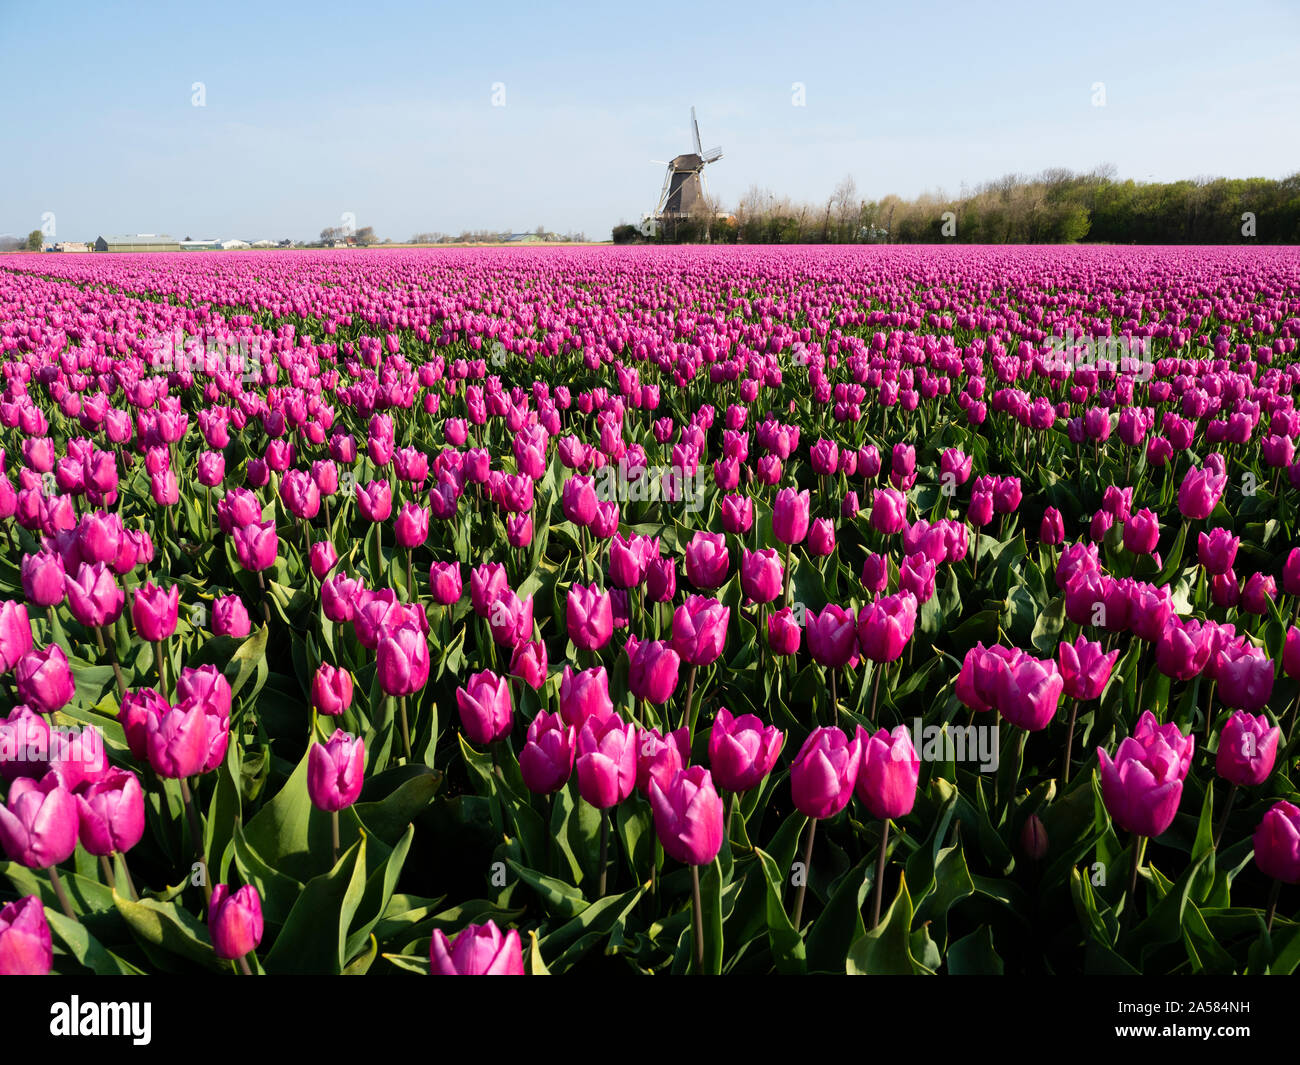 Landscape with pink tulip field, Het Zand, North Holland, Netherlands Stock Photo